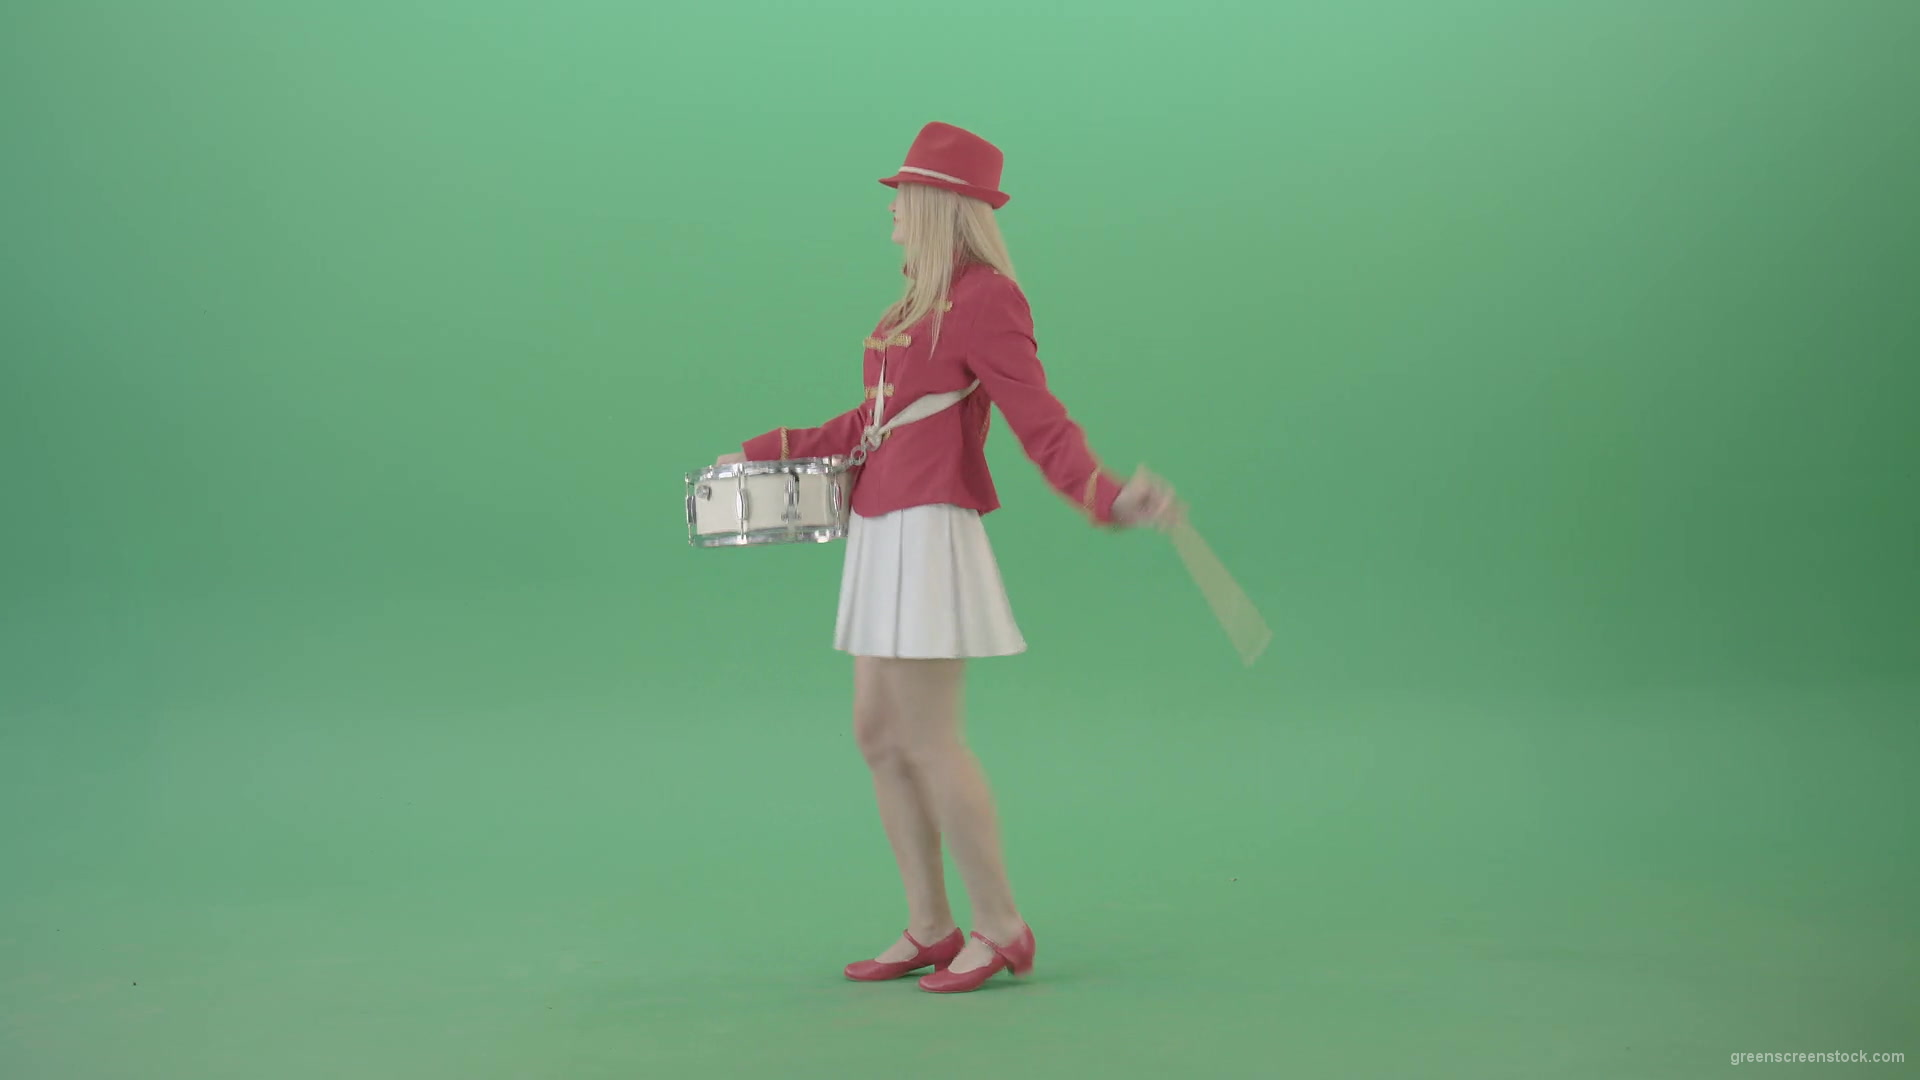 Side-view-of-blonde-girl-in-red-costume-playing-drums-isolated-on-green-screen-4K-Video-Footage-1920_009 Green Screen Stock